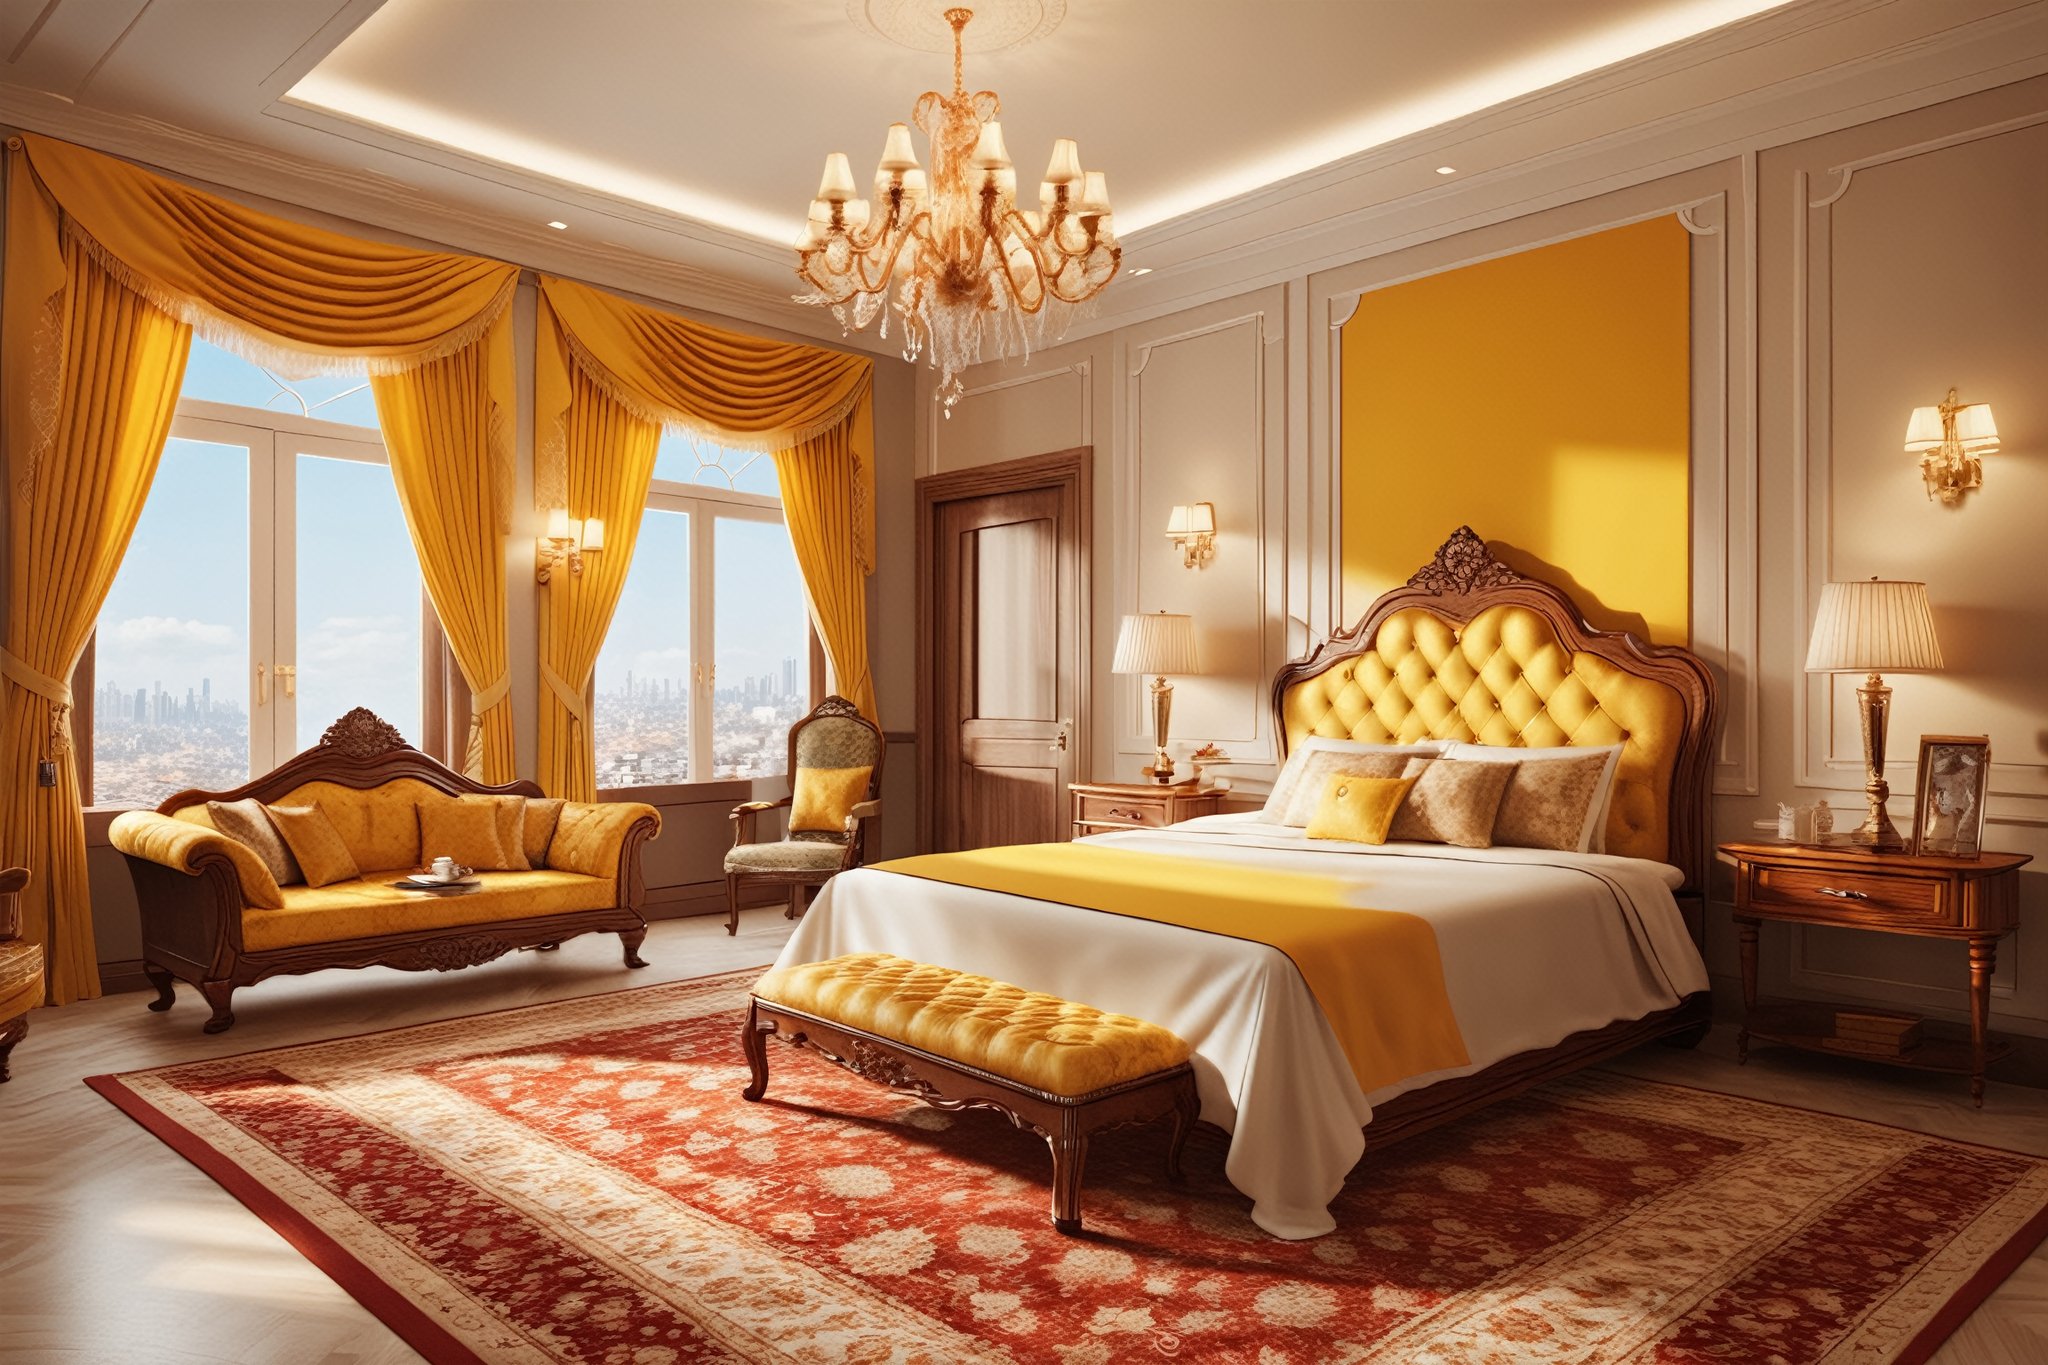 Extremely Realistic,  An eastern kingdom's emperor is on his higest class off luxury palace, random room, yellow is main color, flag is red and a golden star 